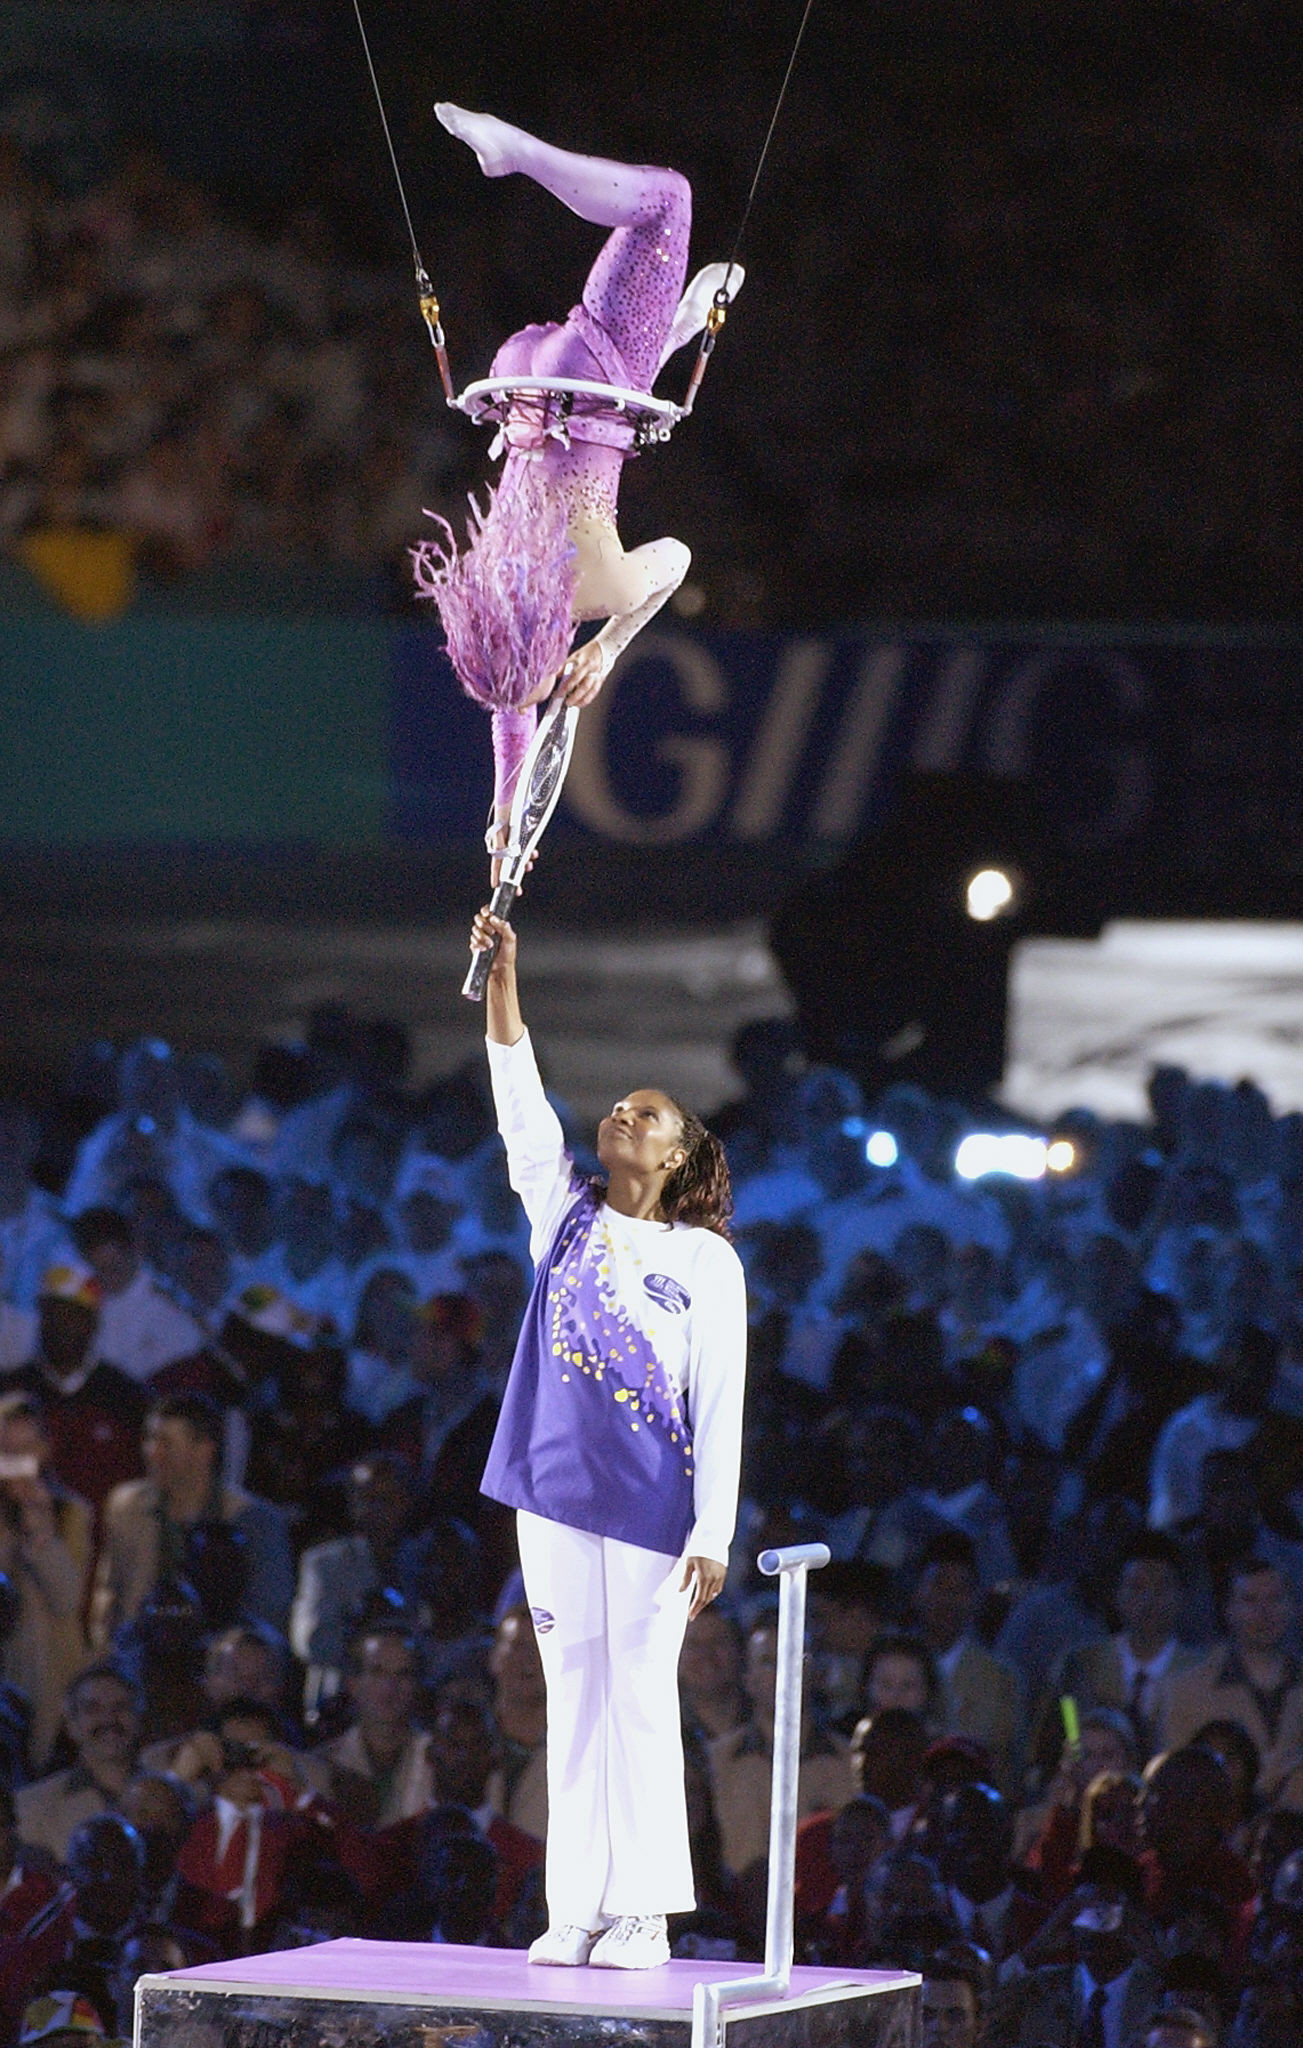 Pregnancy forced Denise Lewis to miss the 2002 Games but she received the Queen's Baton from an aerialist at the Opening Ceremony in Manchester  ©Getty Images